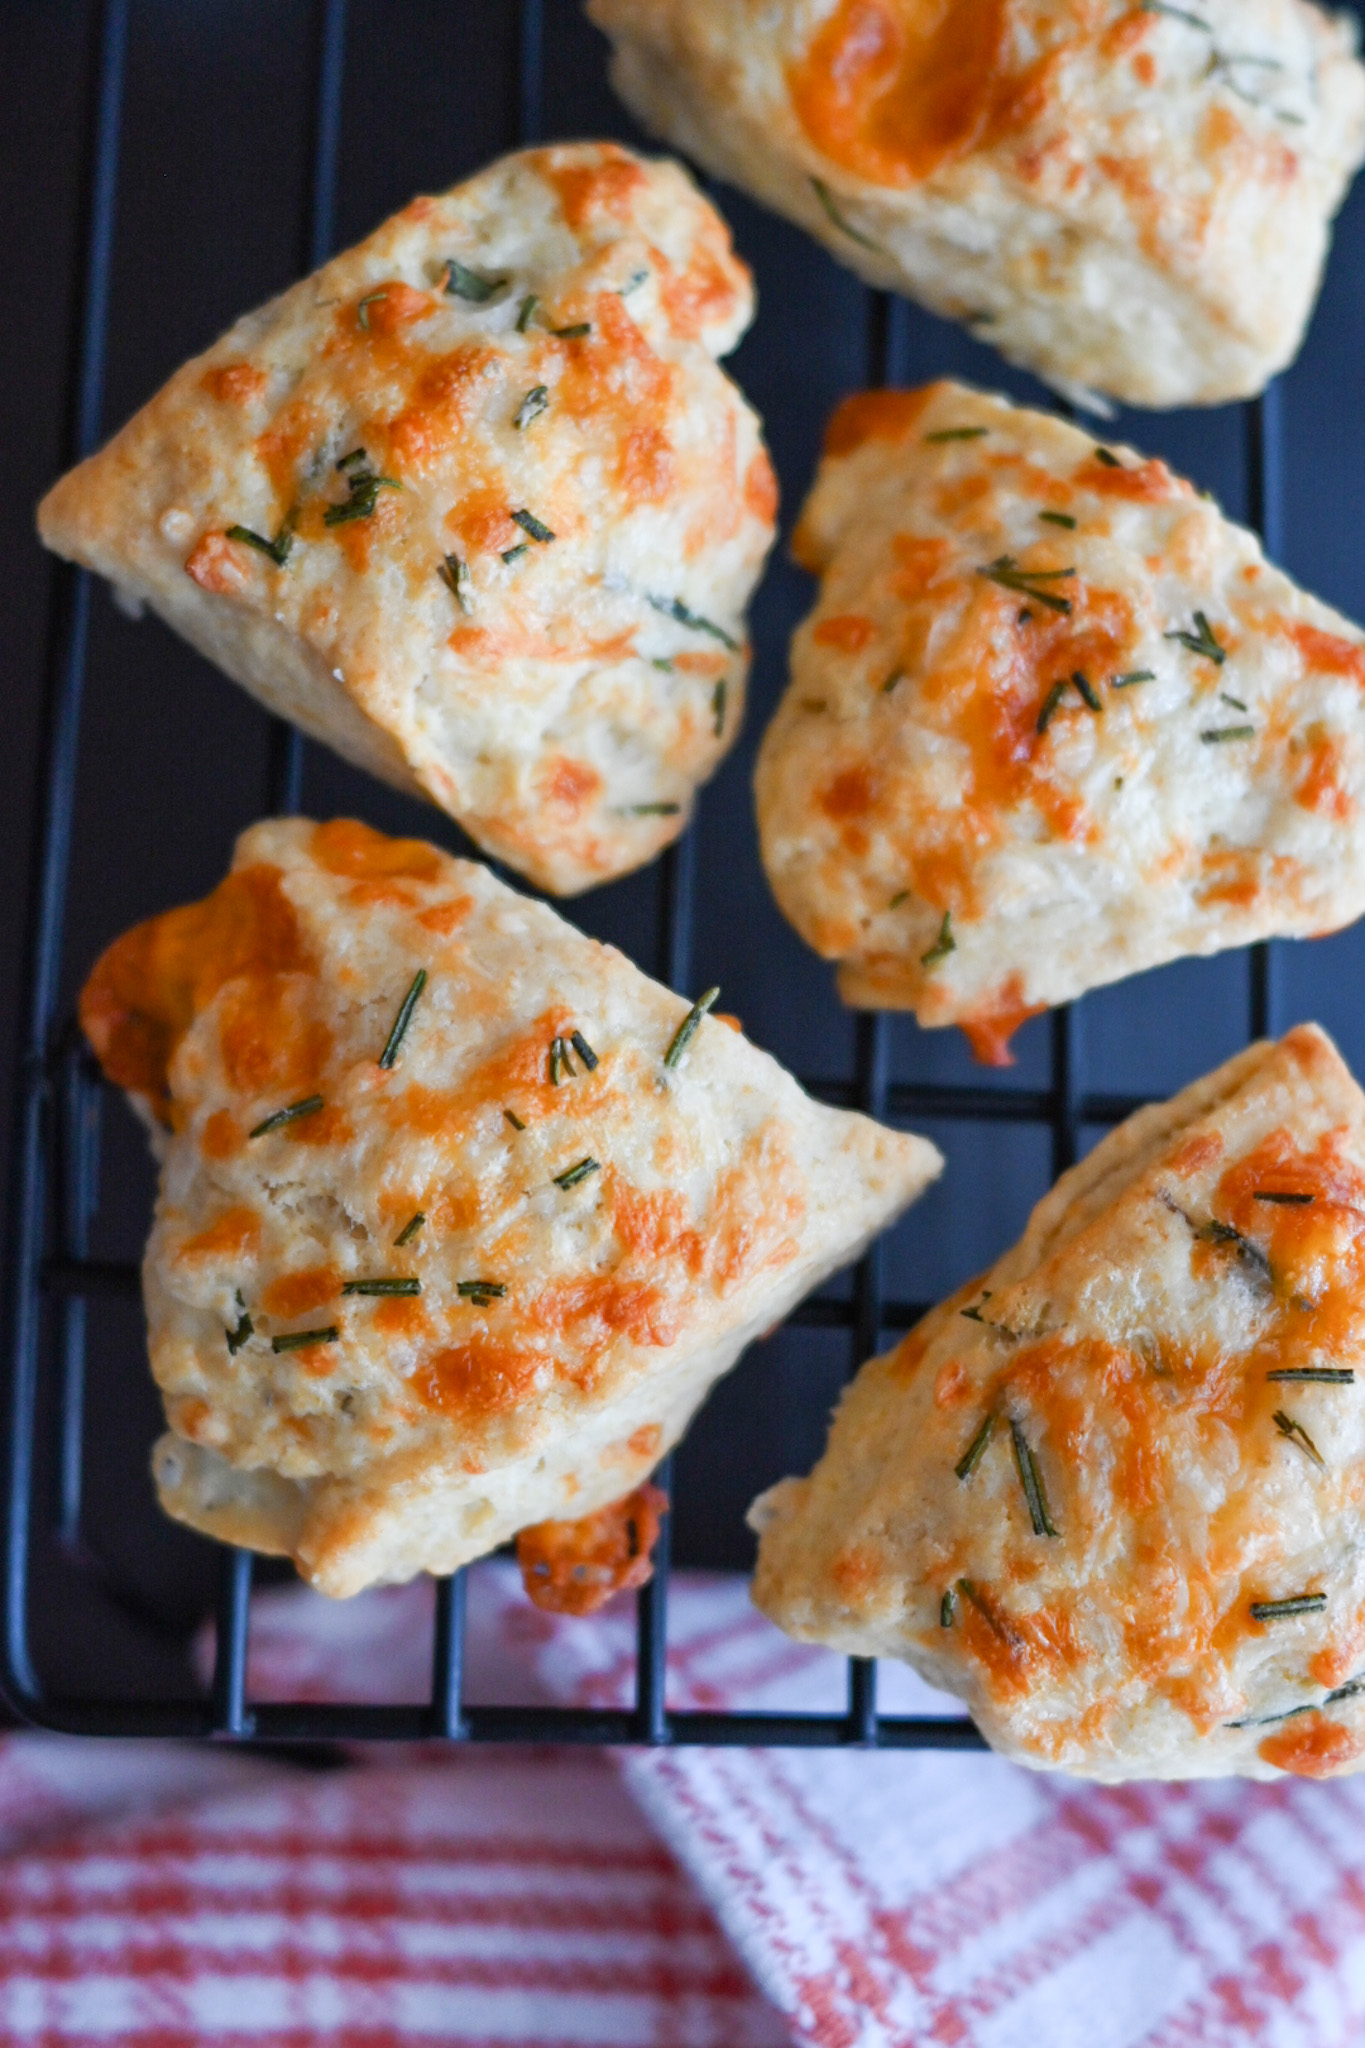 Rosemary, Gruyère, and Cheddar Scones